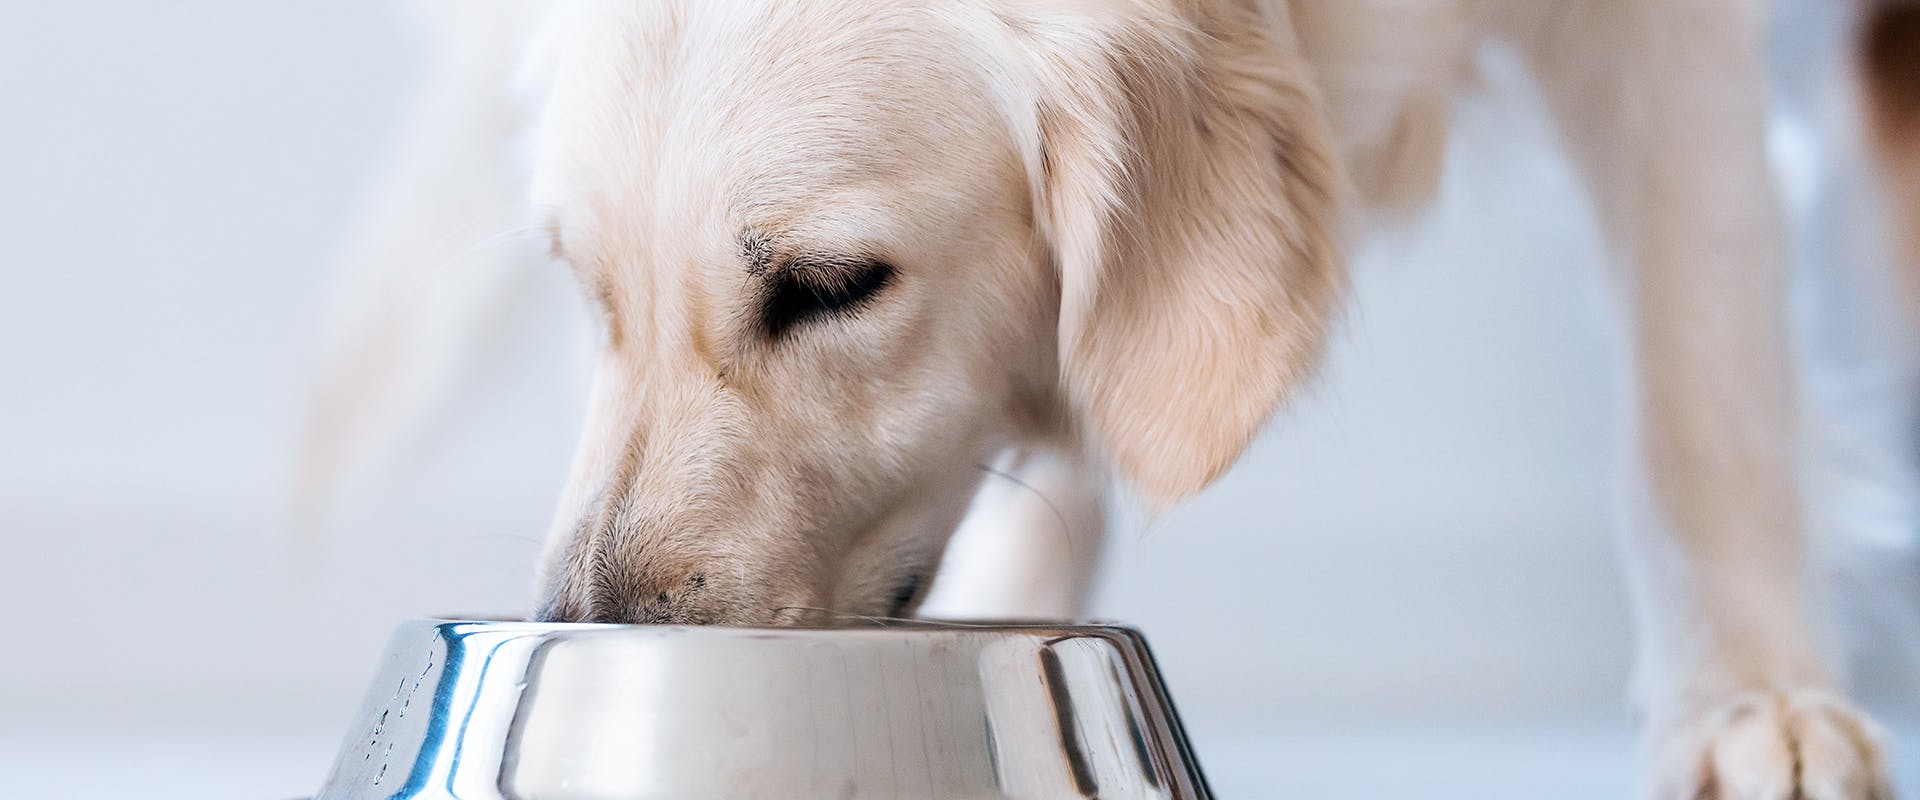 A Labrador eating from a stainless steel dog bowl